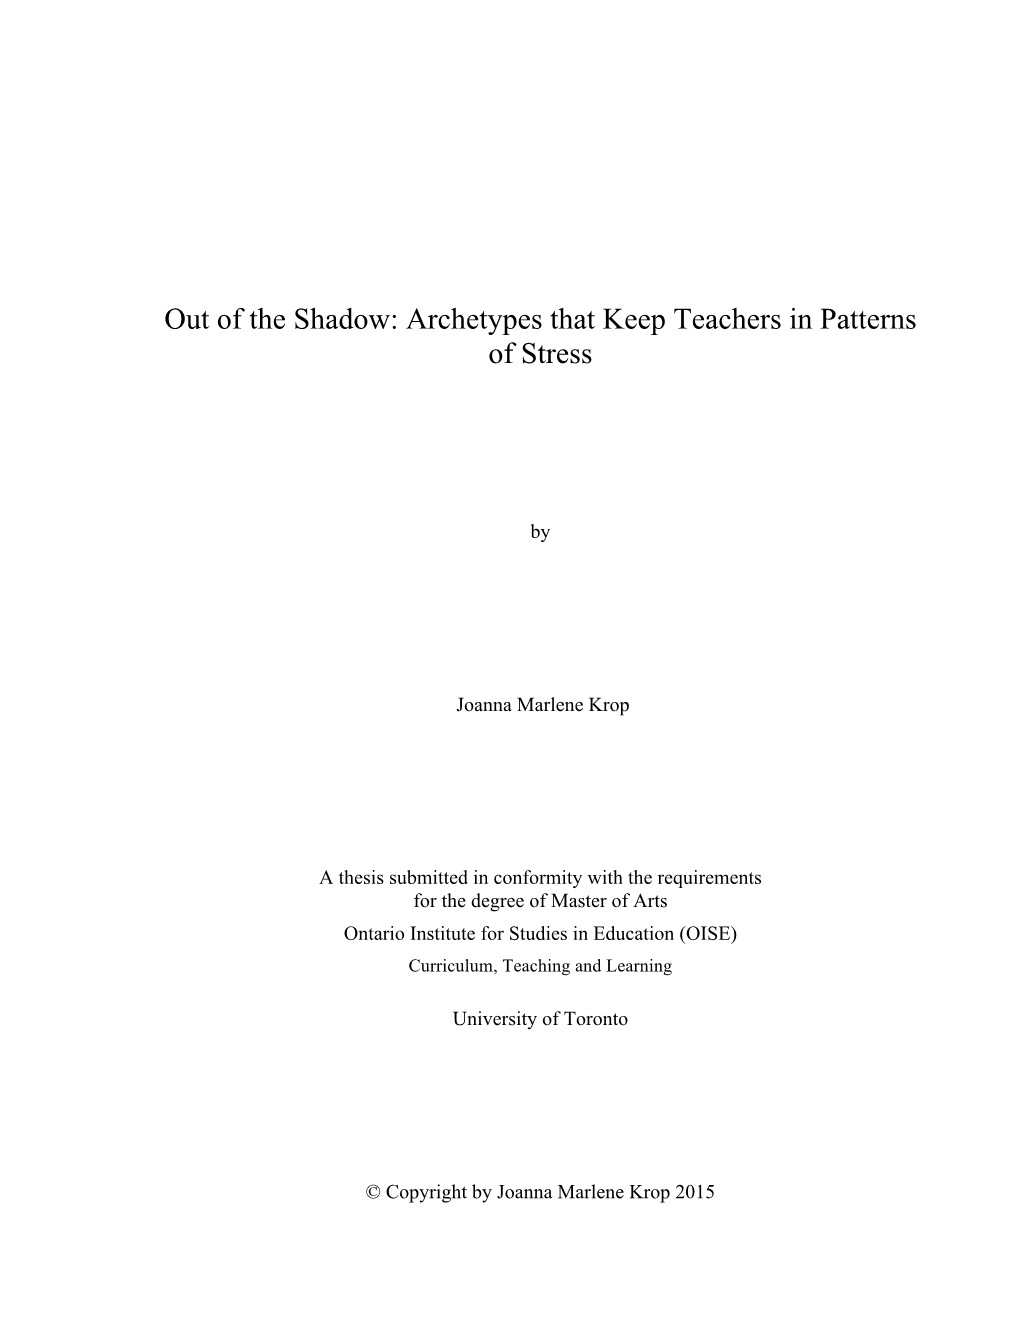 Out of the Shadow: Archetypes That Keep Teachers in Patterns of Stress